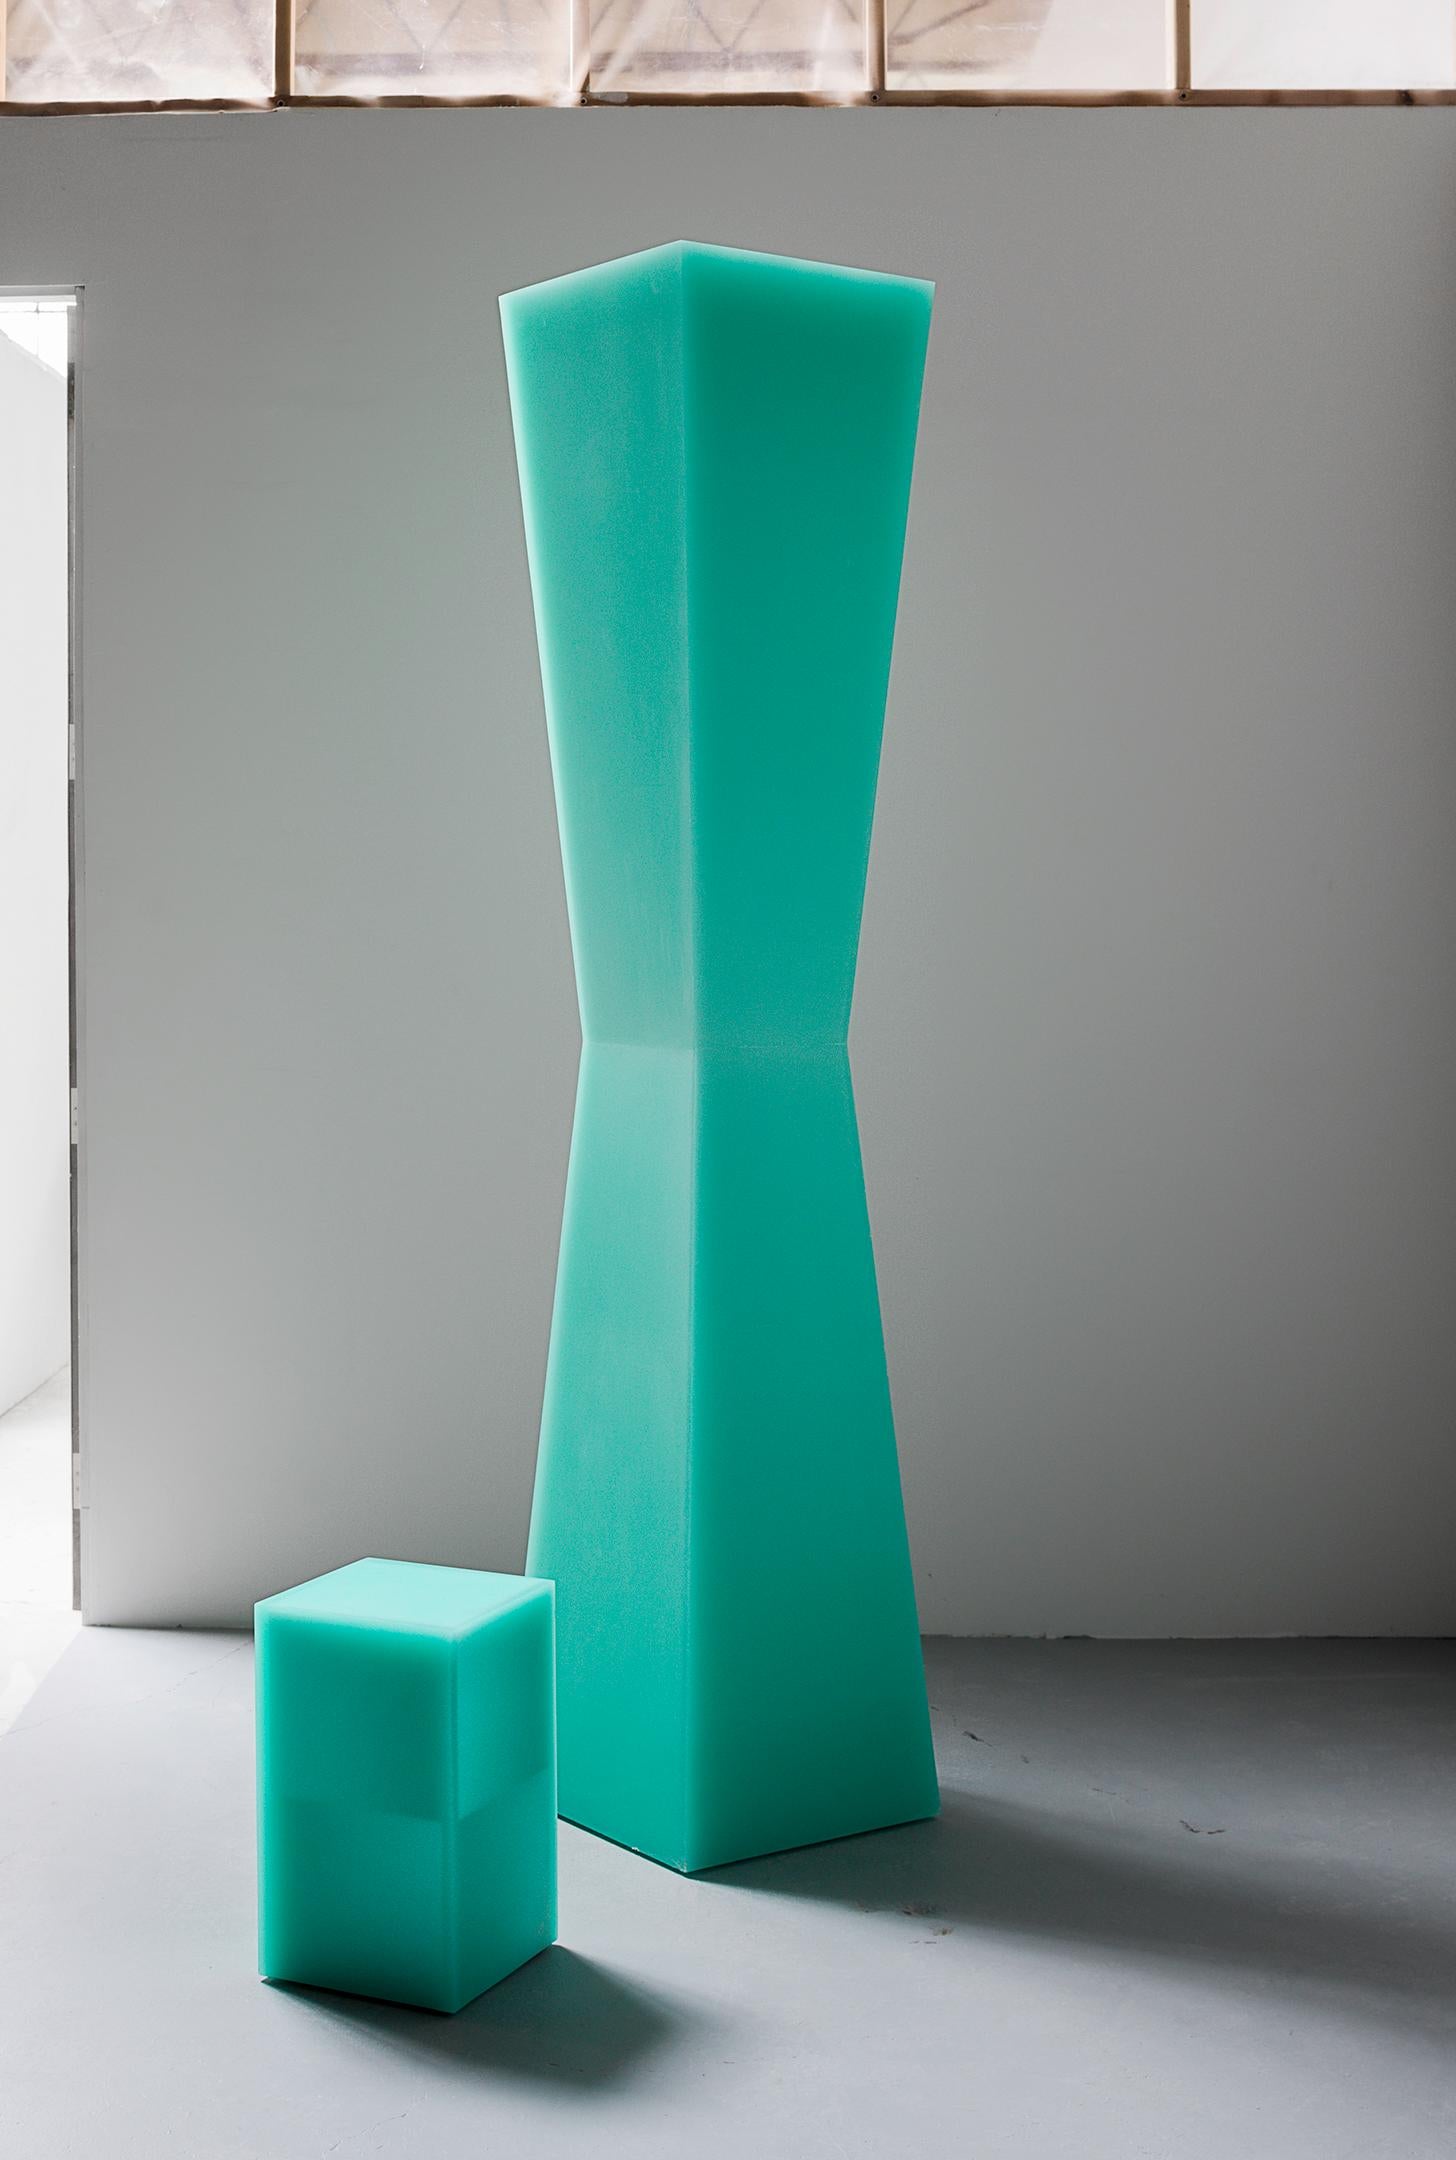 American Column Resin Sculpture/Decor in Turquoise by Facture, REP by Tuleste Factory For Sale